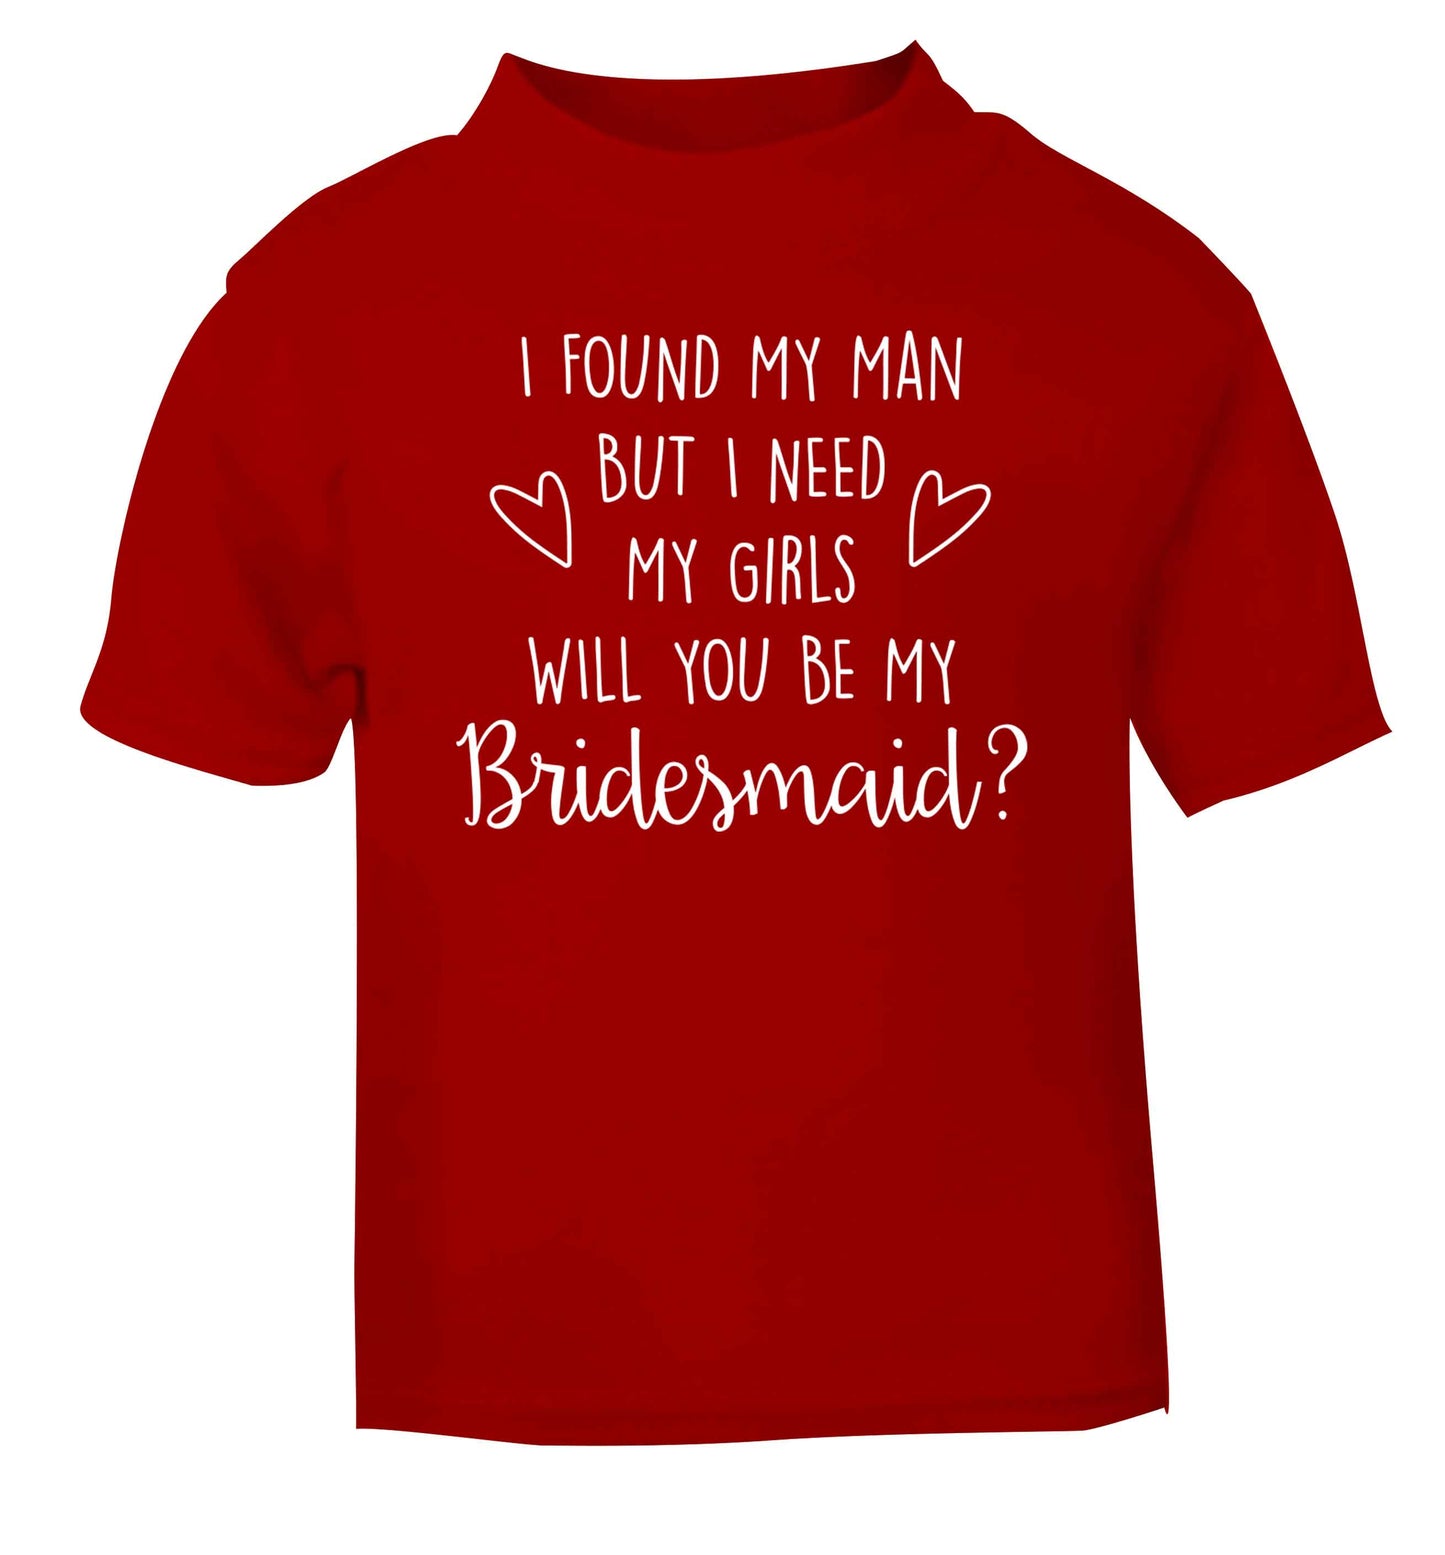 I found my man but I need my girls will you be my bridesmaid? red baby toddler Tshirt 2 Years